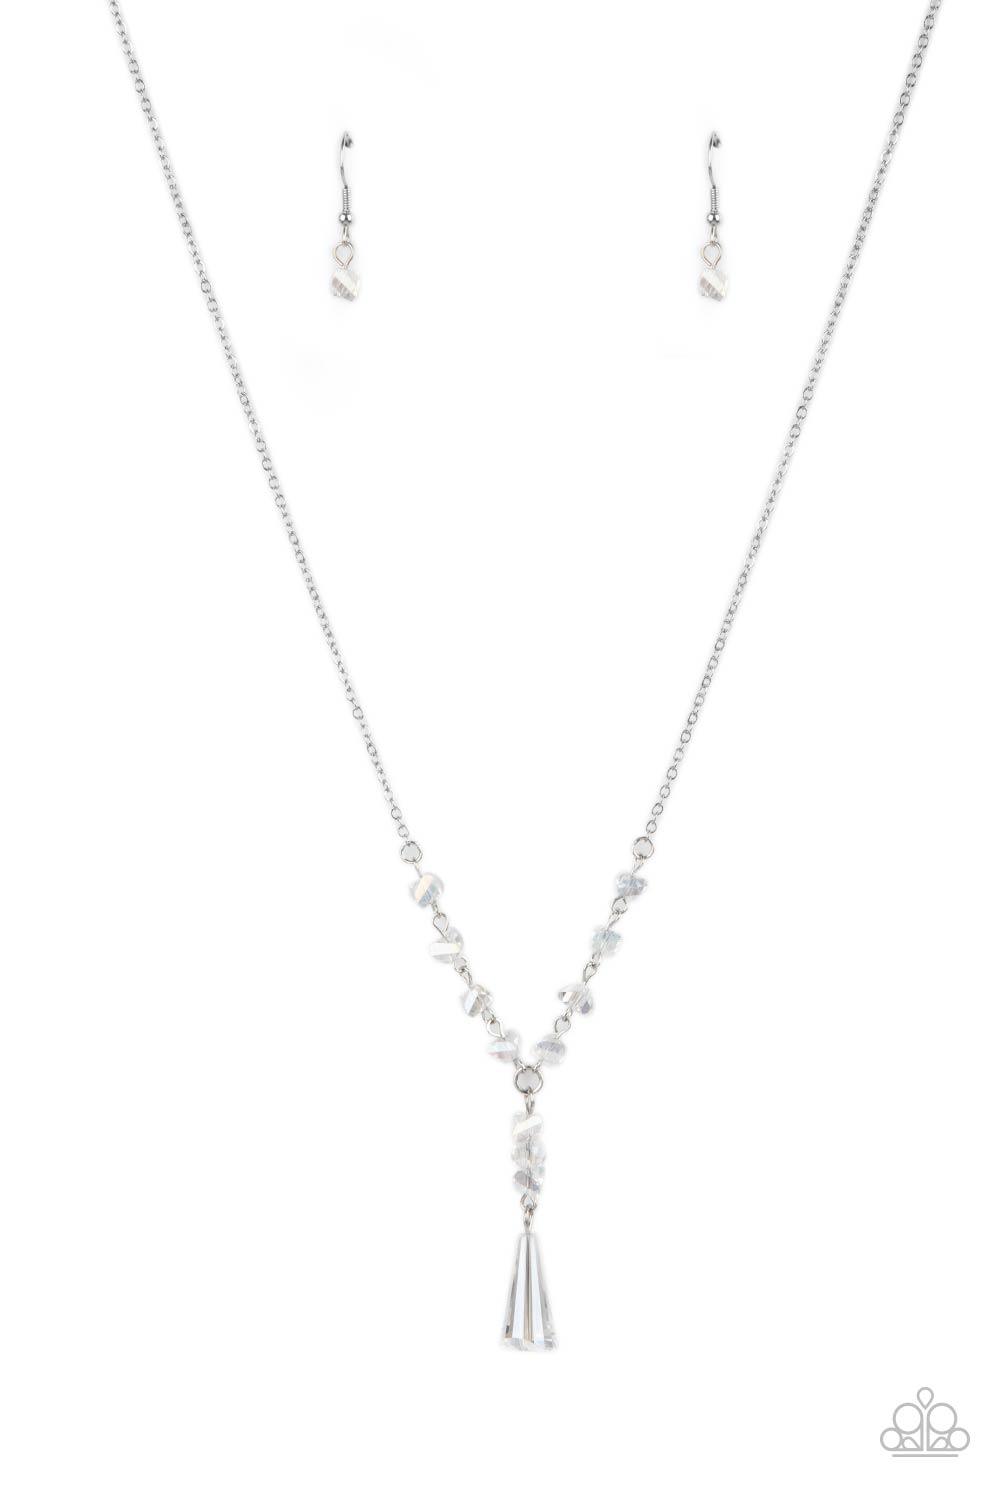 Paparazzi Accessories Olympian Oracle - White Featuring an iridescent shimmer, raw cut glassy beads trickle along a dainty silver chain, giving way to a tranquil crystal-like pendant below the collar. Features an adjustable clasp closure. Sold as one indi